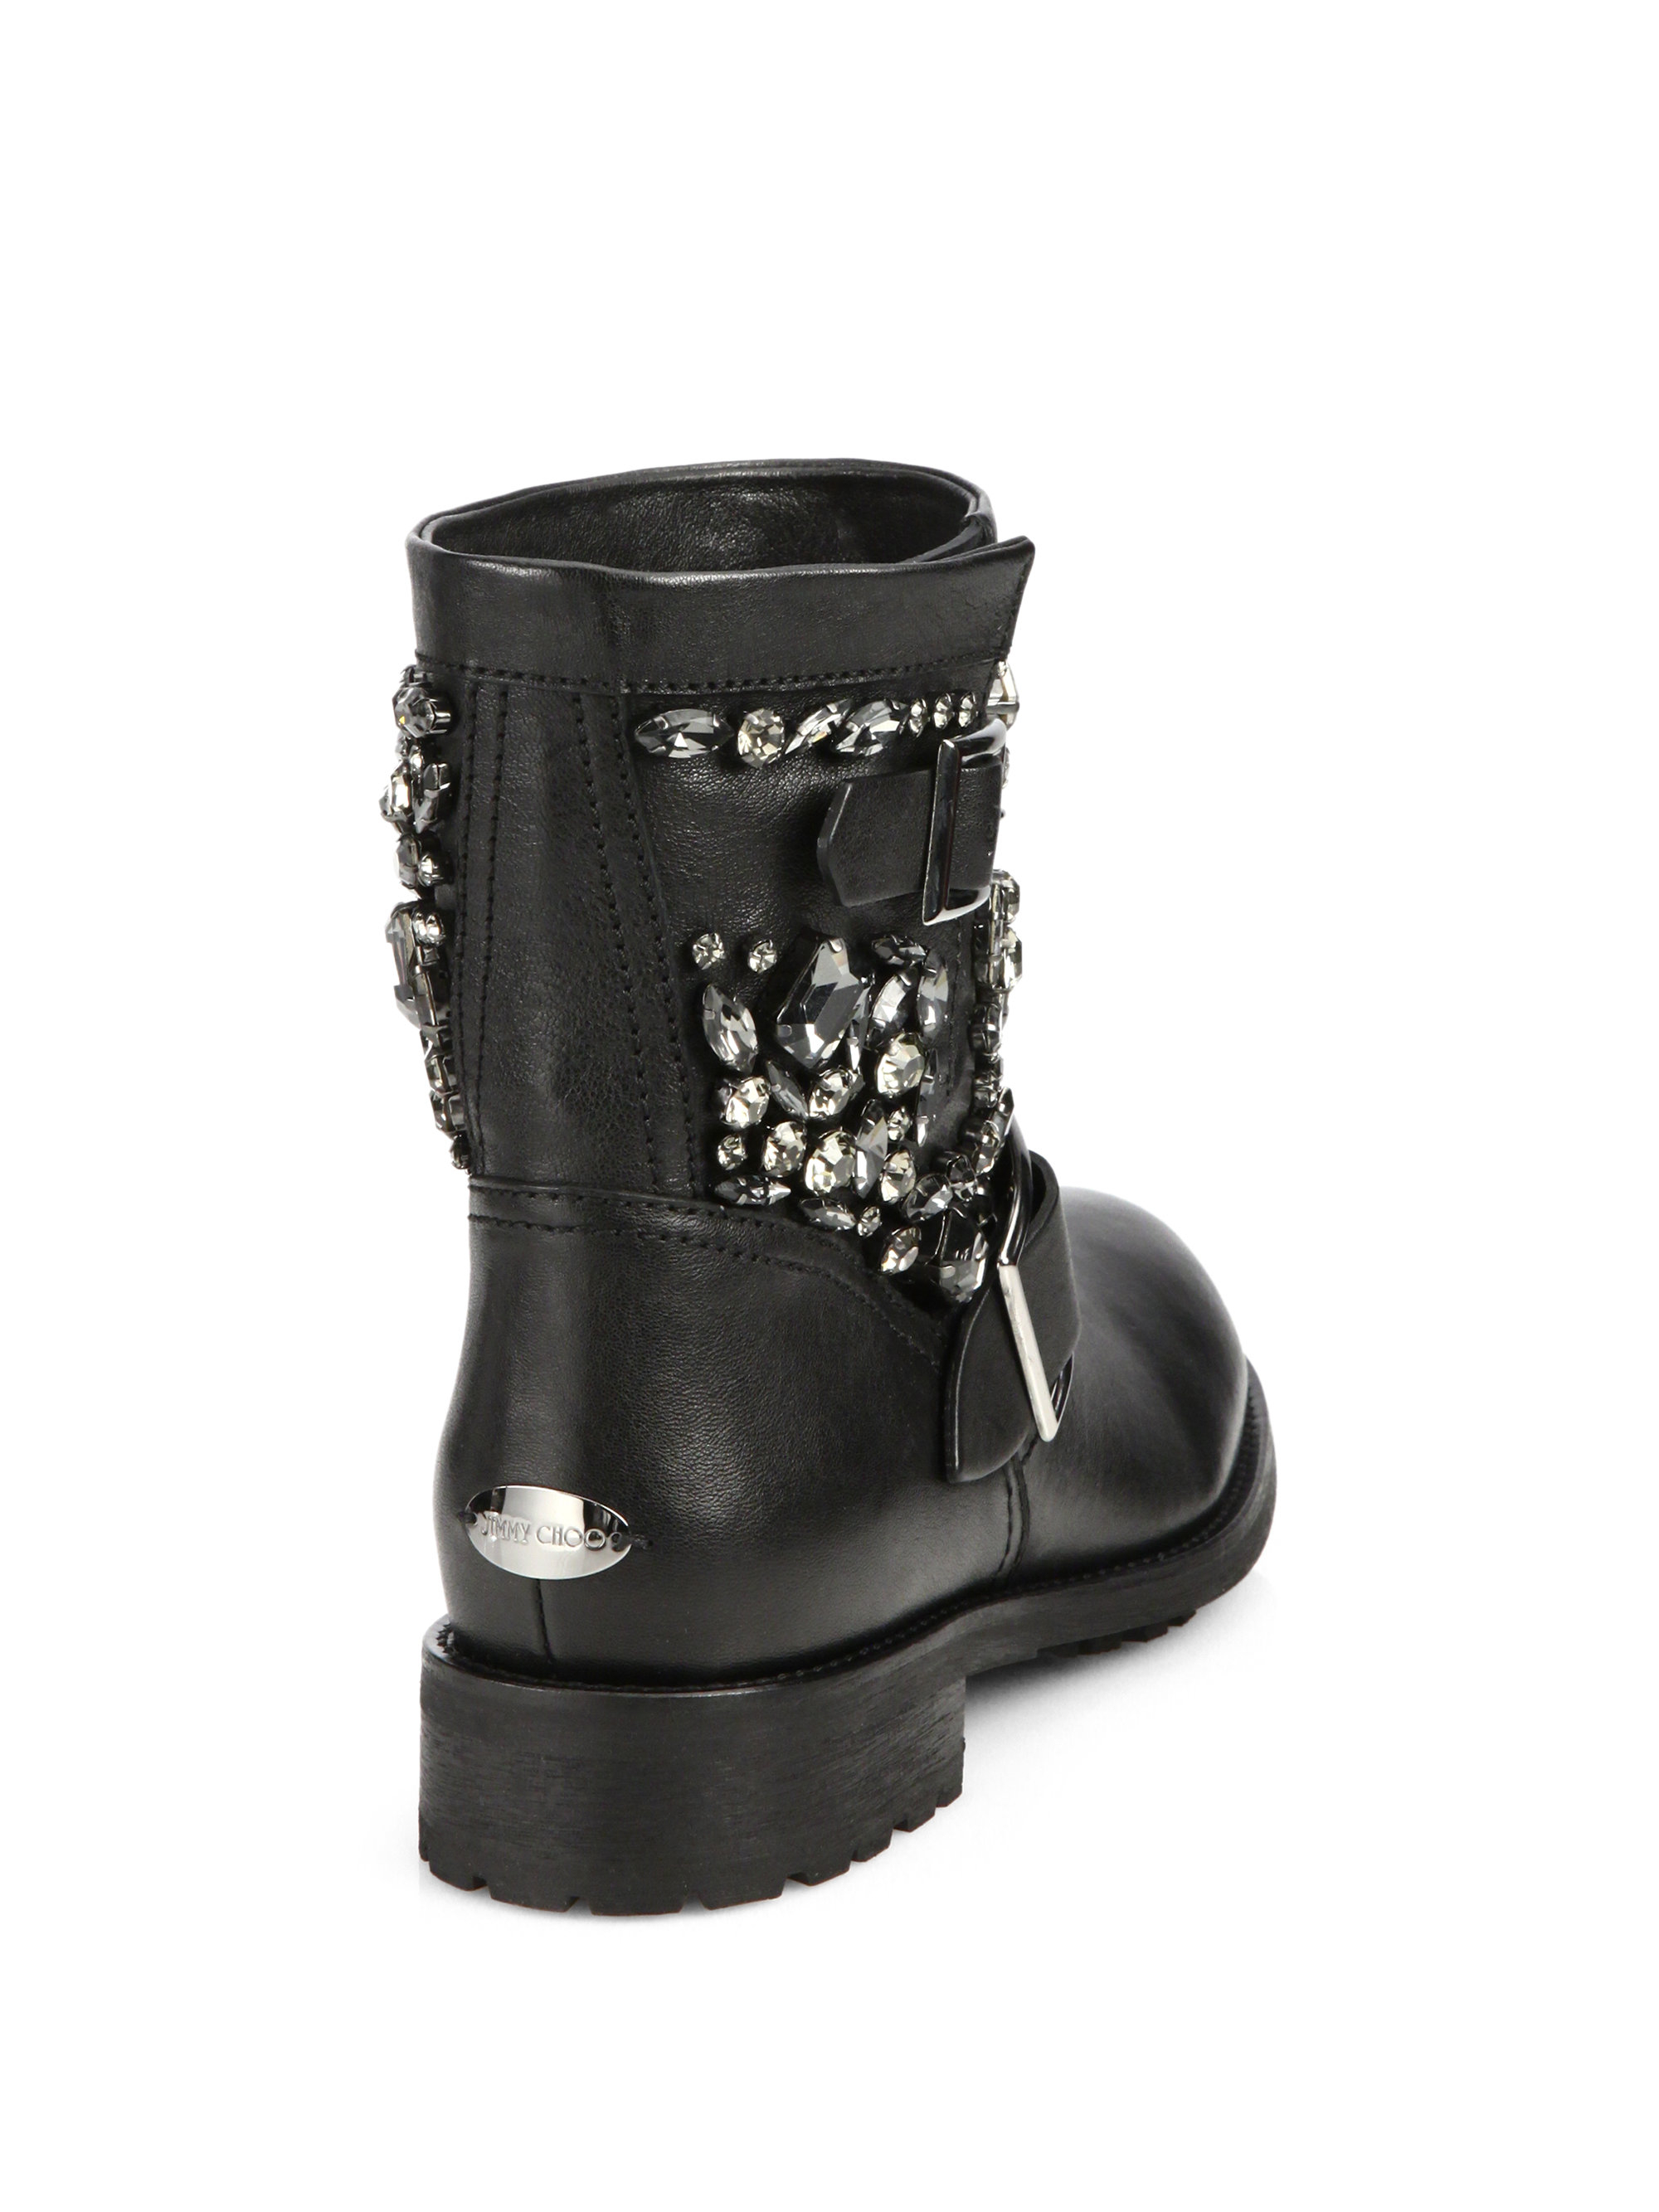 Jimmy Choo Crystal-studded Leather Biker Boots in Black | Lyst